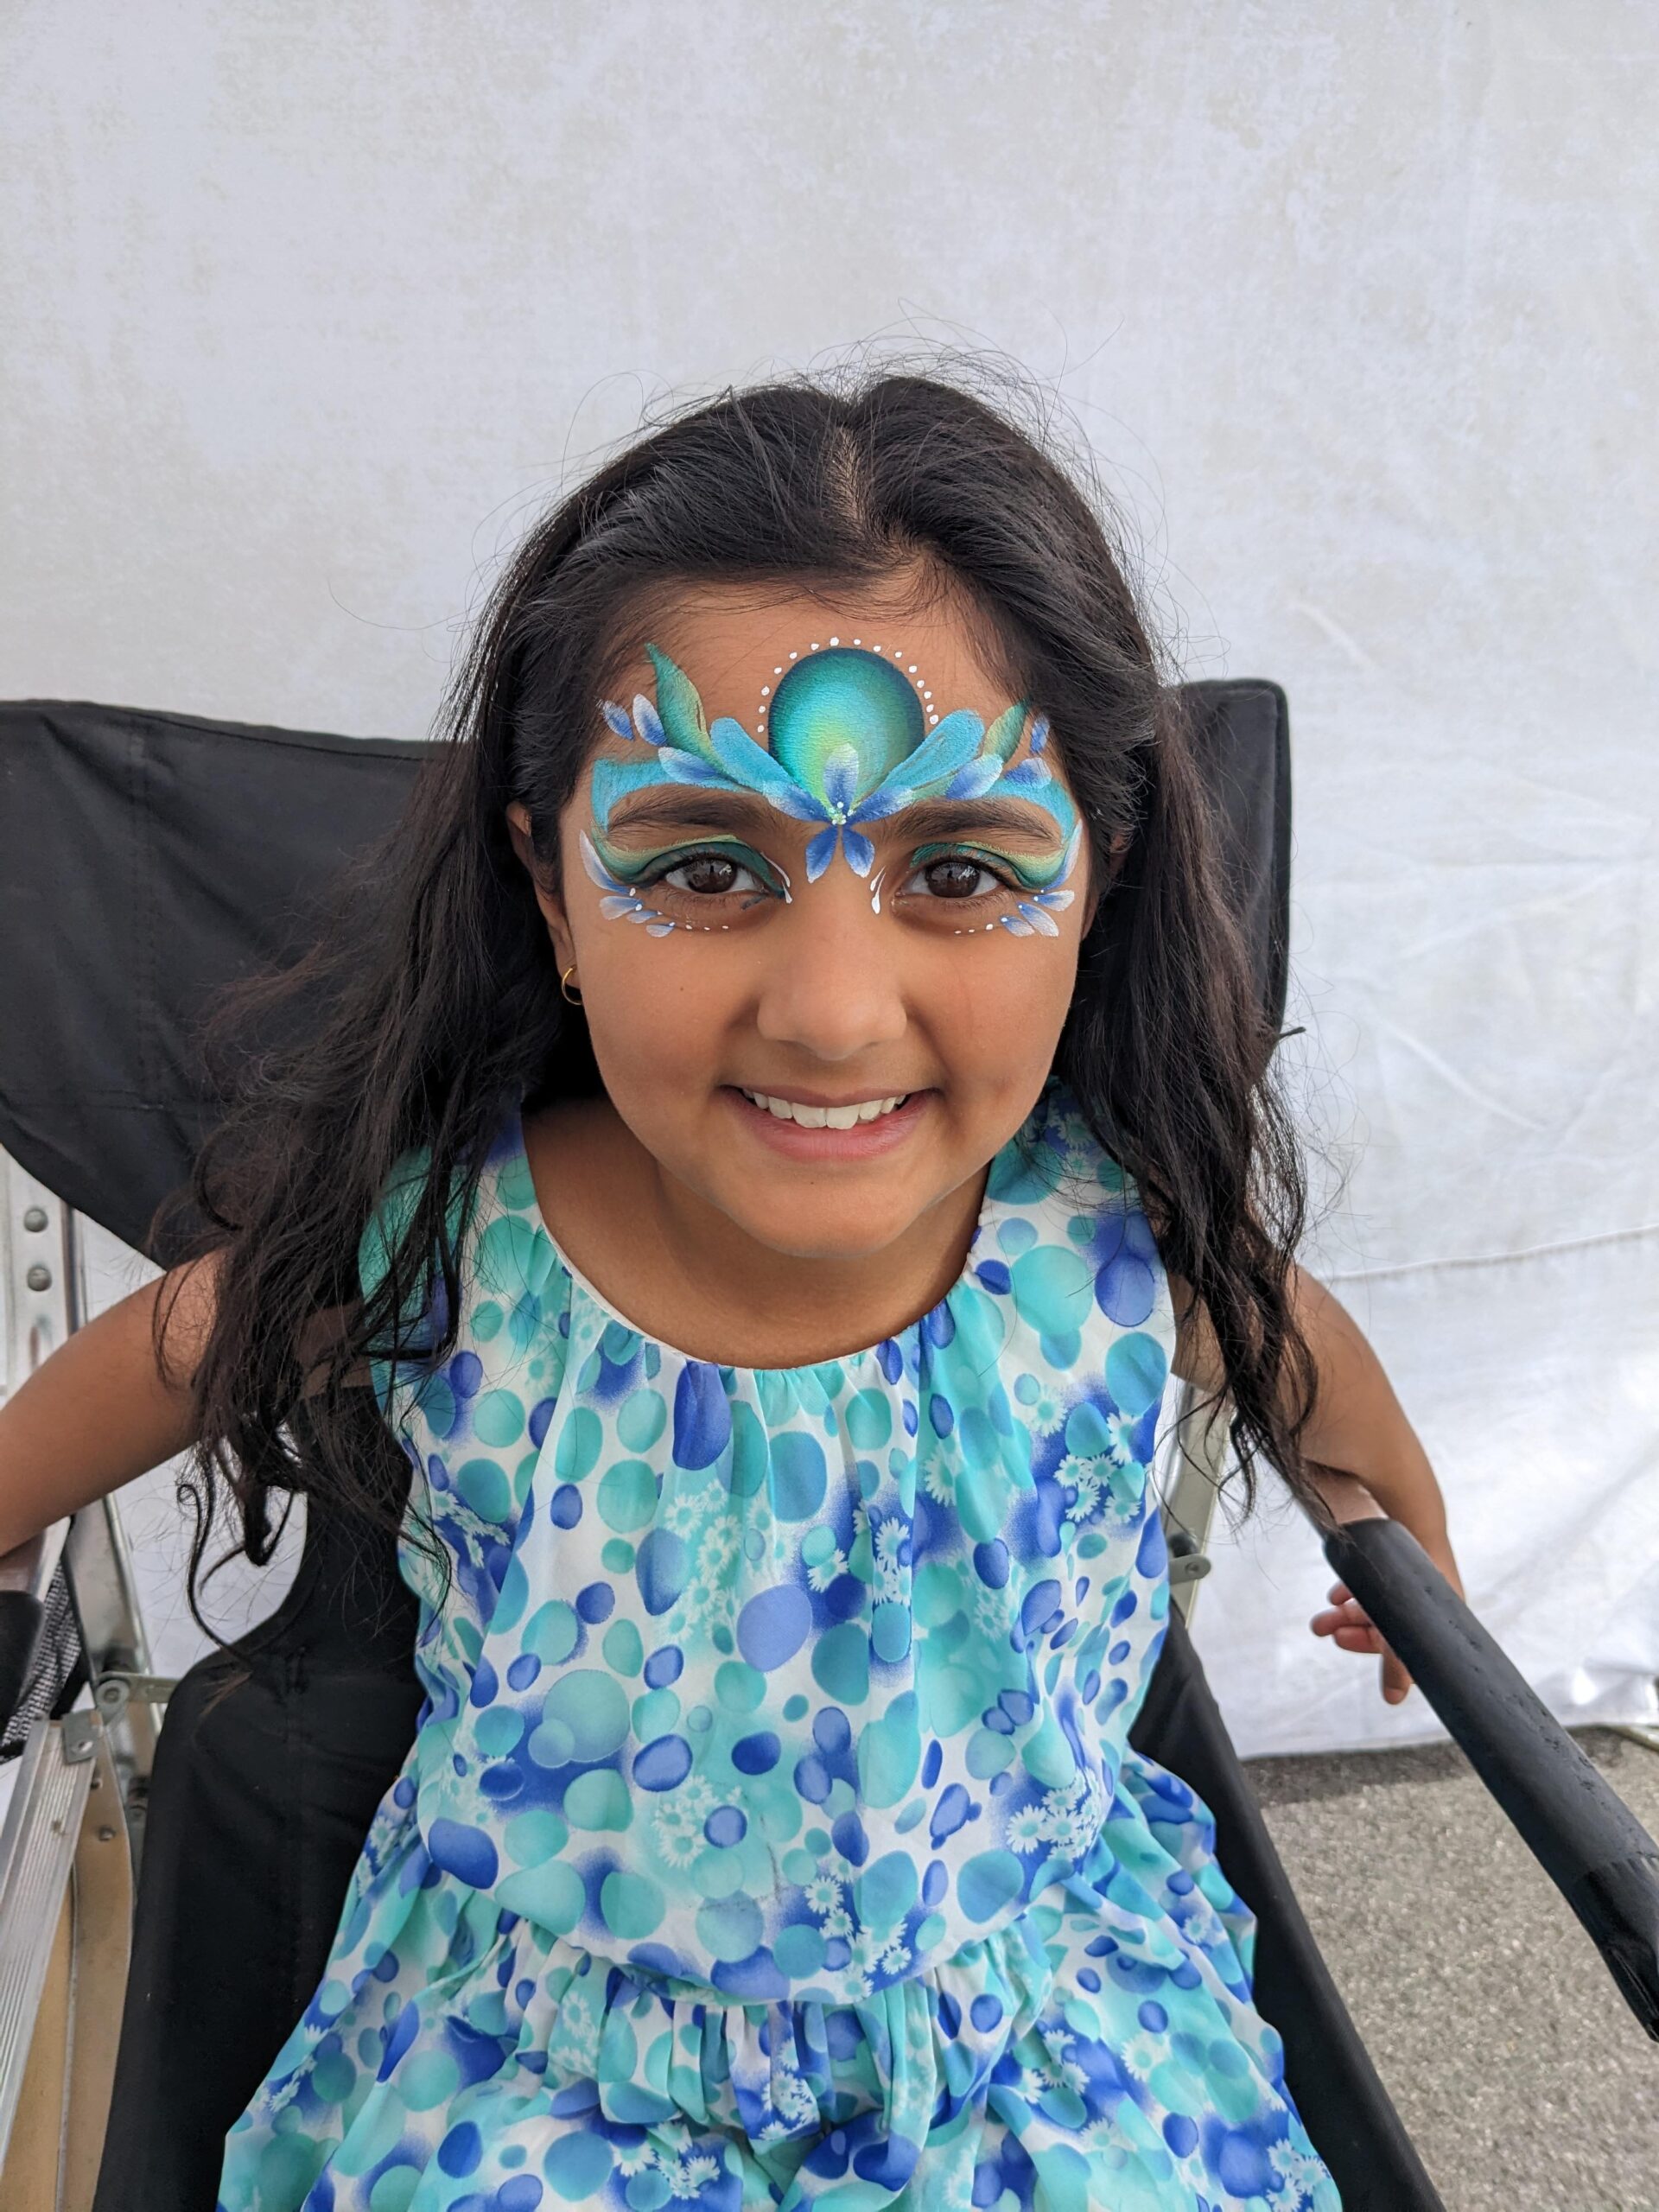 Hire Top Melbourne Face Painters & Bring Boundless Fun to Any Event